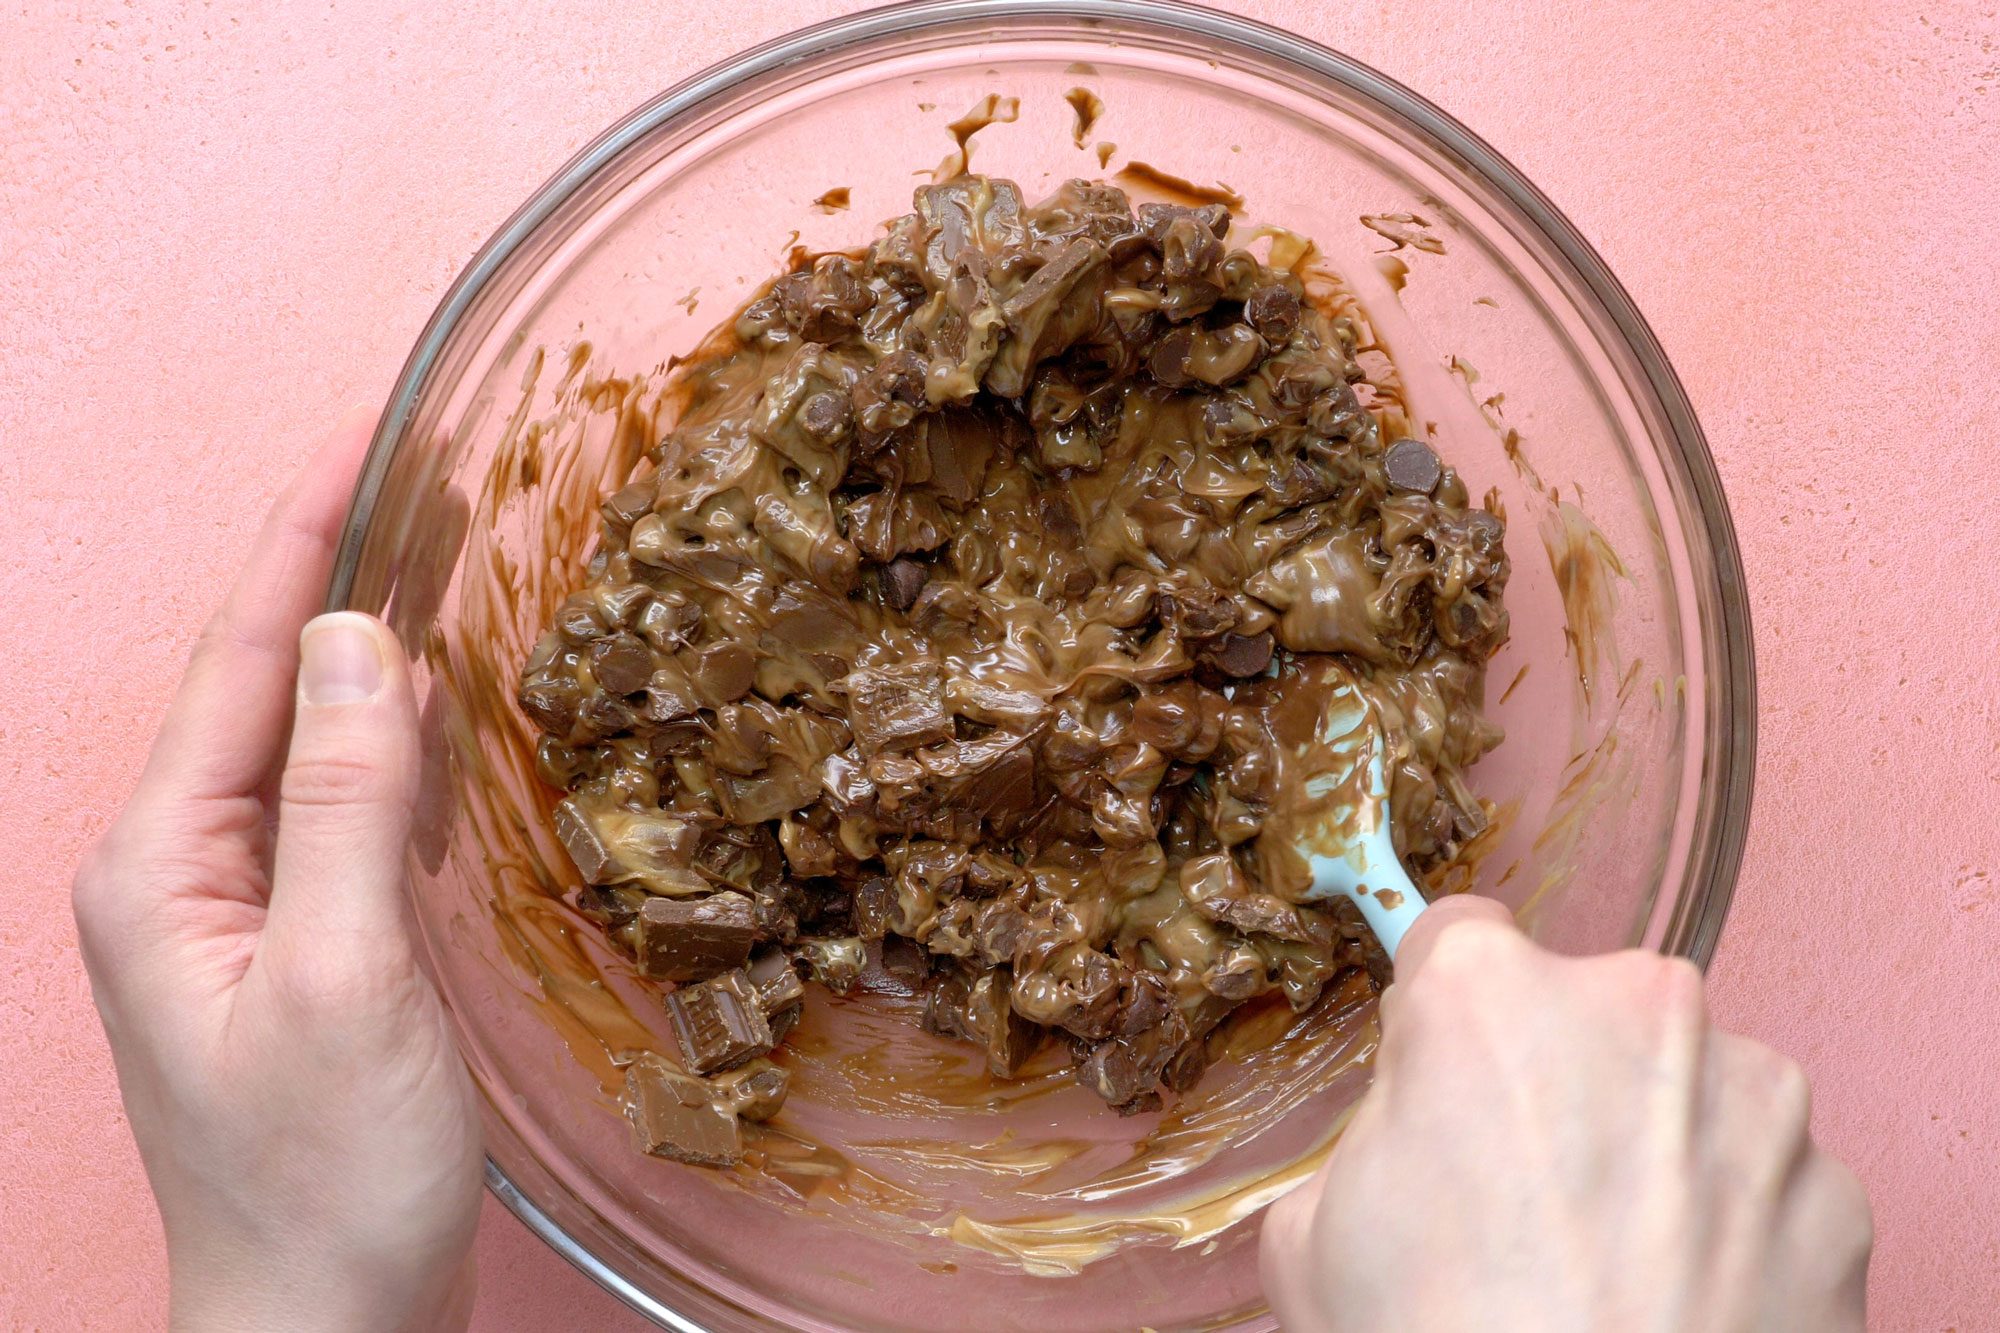 Mix melted chocolate chips, candy bars and remaining peanut butter in a large bowl